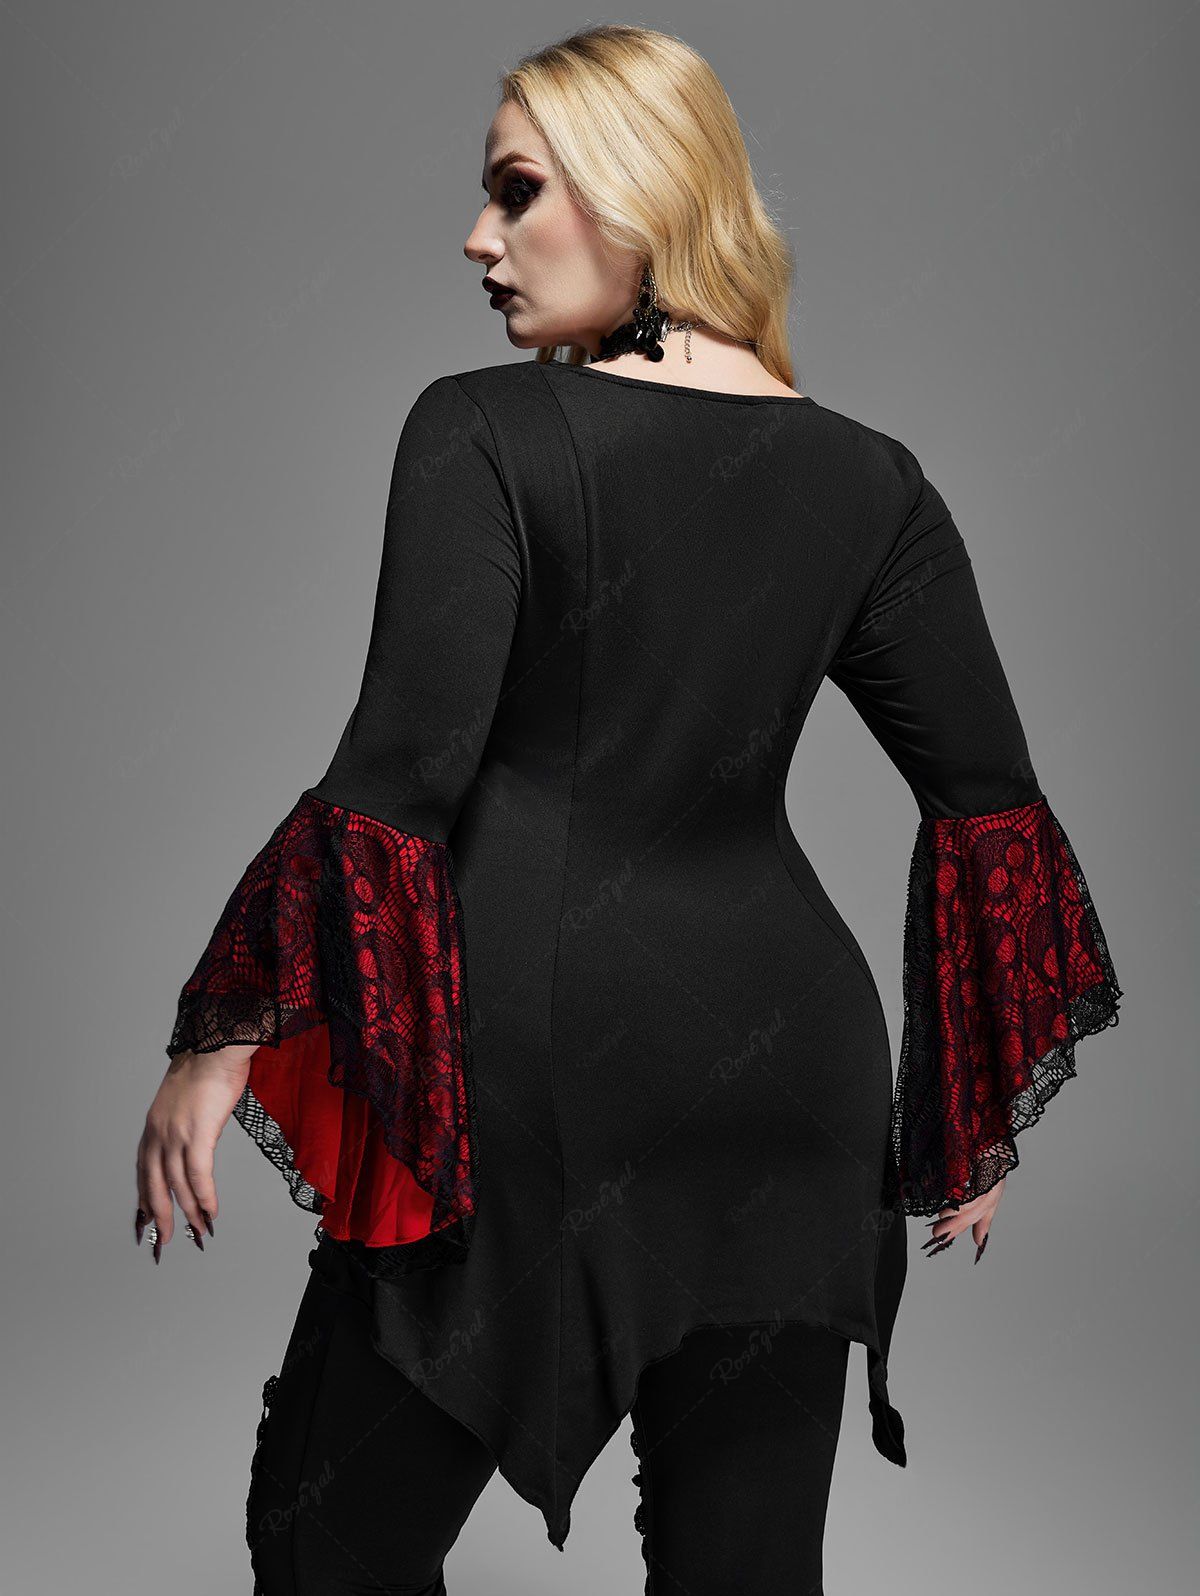 Gothic Bell Sleeve Skull Lace Handkerchief Long Sleeve Blouse Top